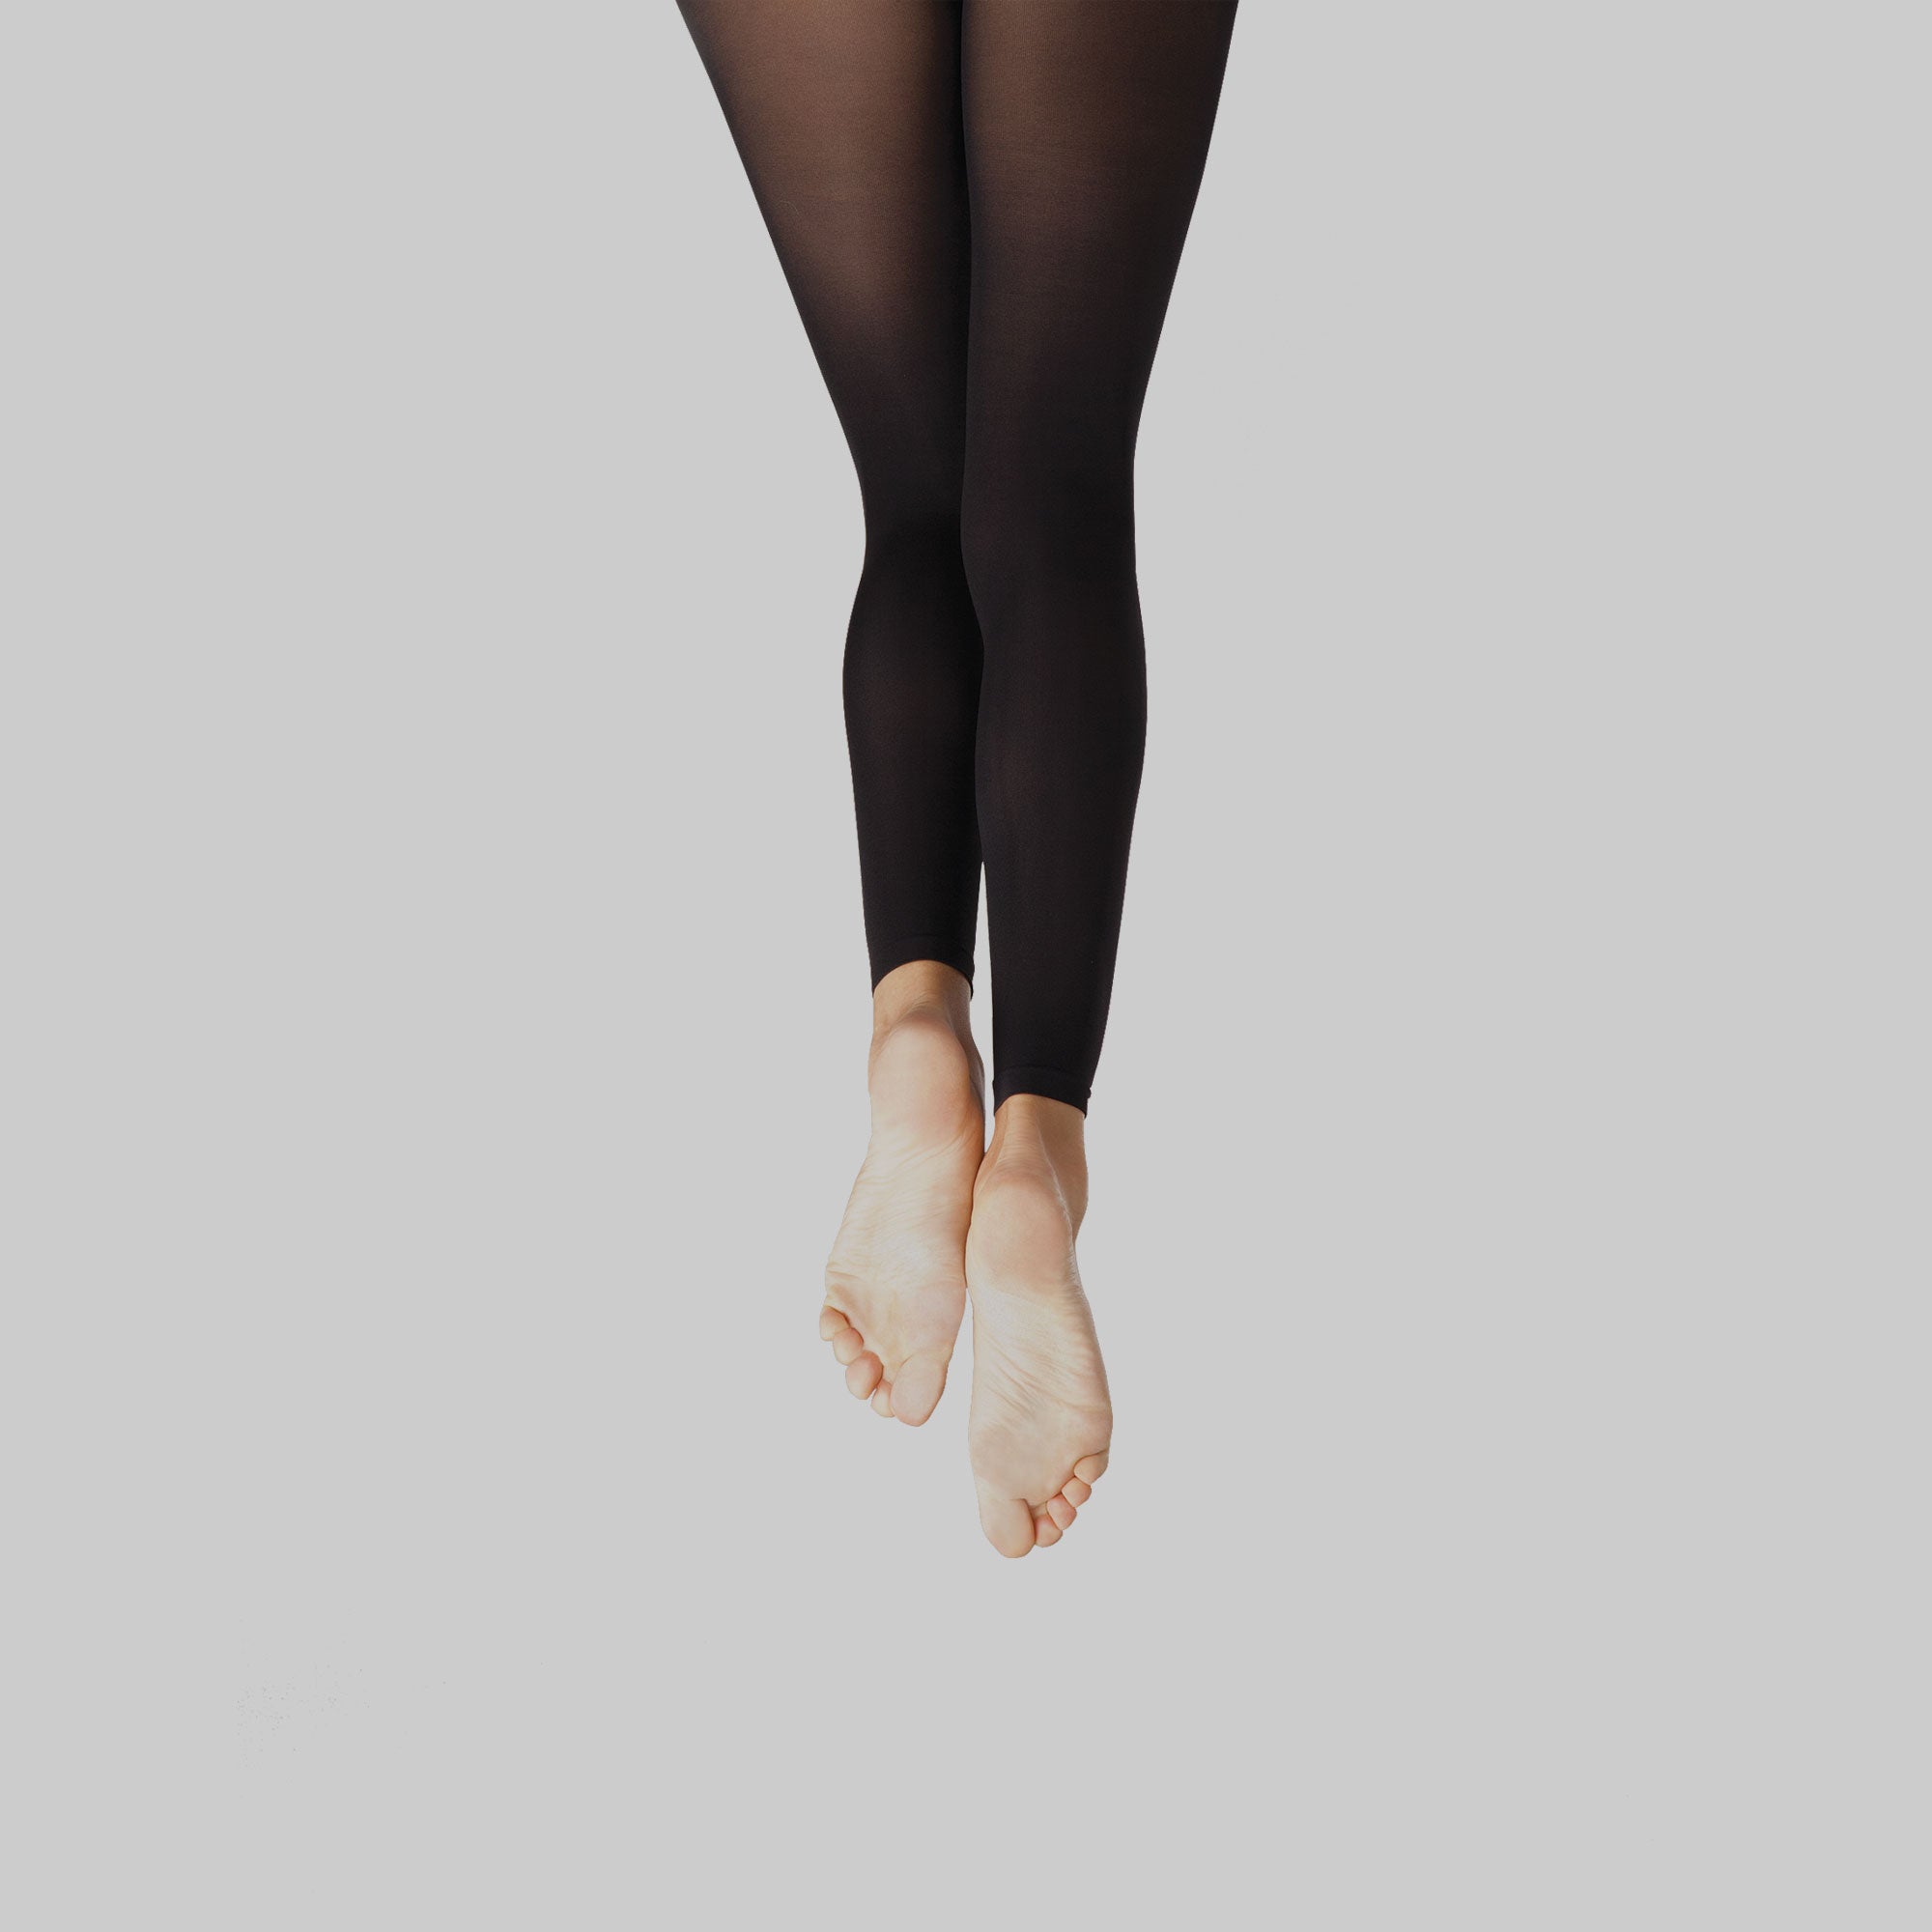 1pc Women's 200g Black Footless Tights Suitable For 5-15°c Temperature,  Autumn/winter